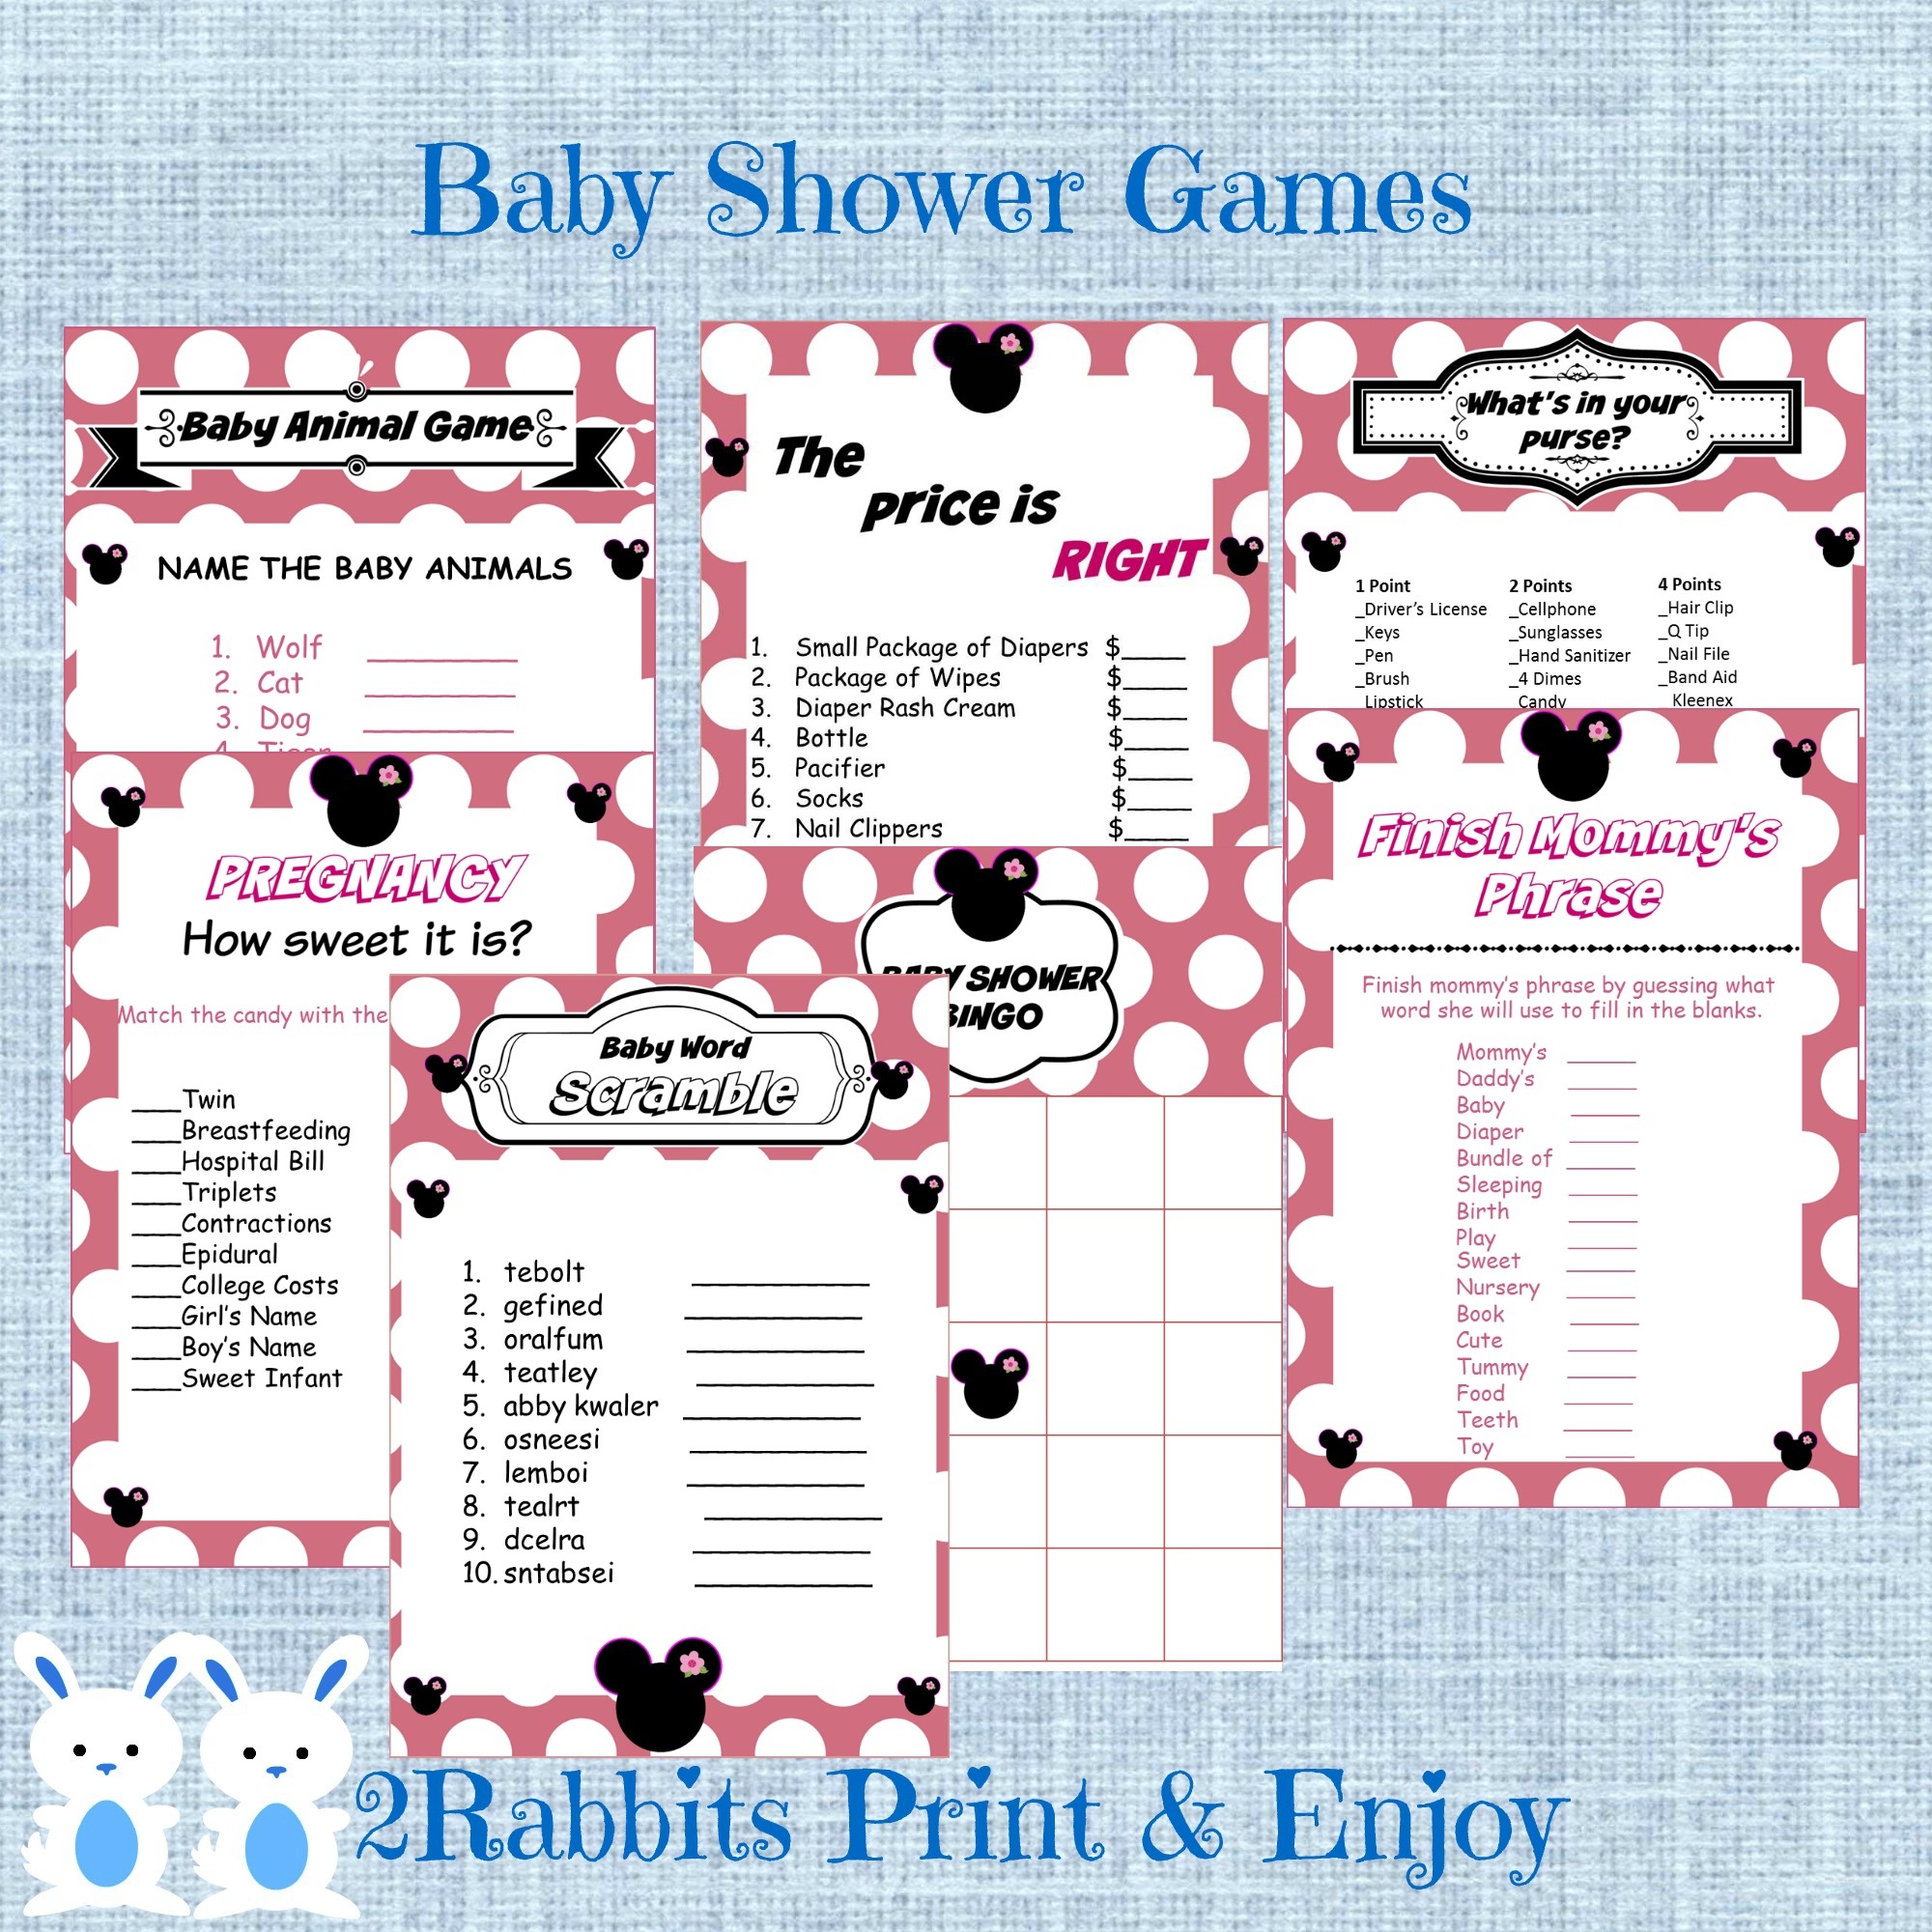 Mickey Mouse Babyshower Ideas - My Practical Baby Shower Guide - Free Printable Mickey Mouse Baby Shower Games